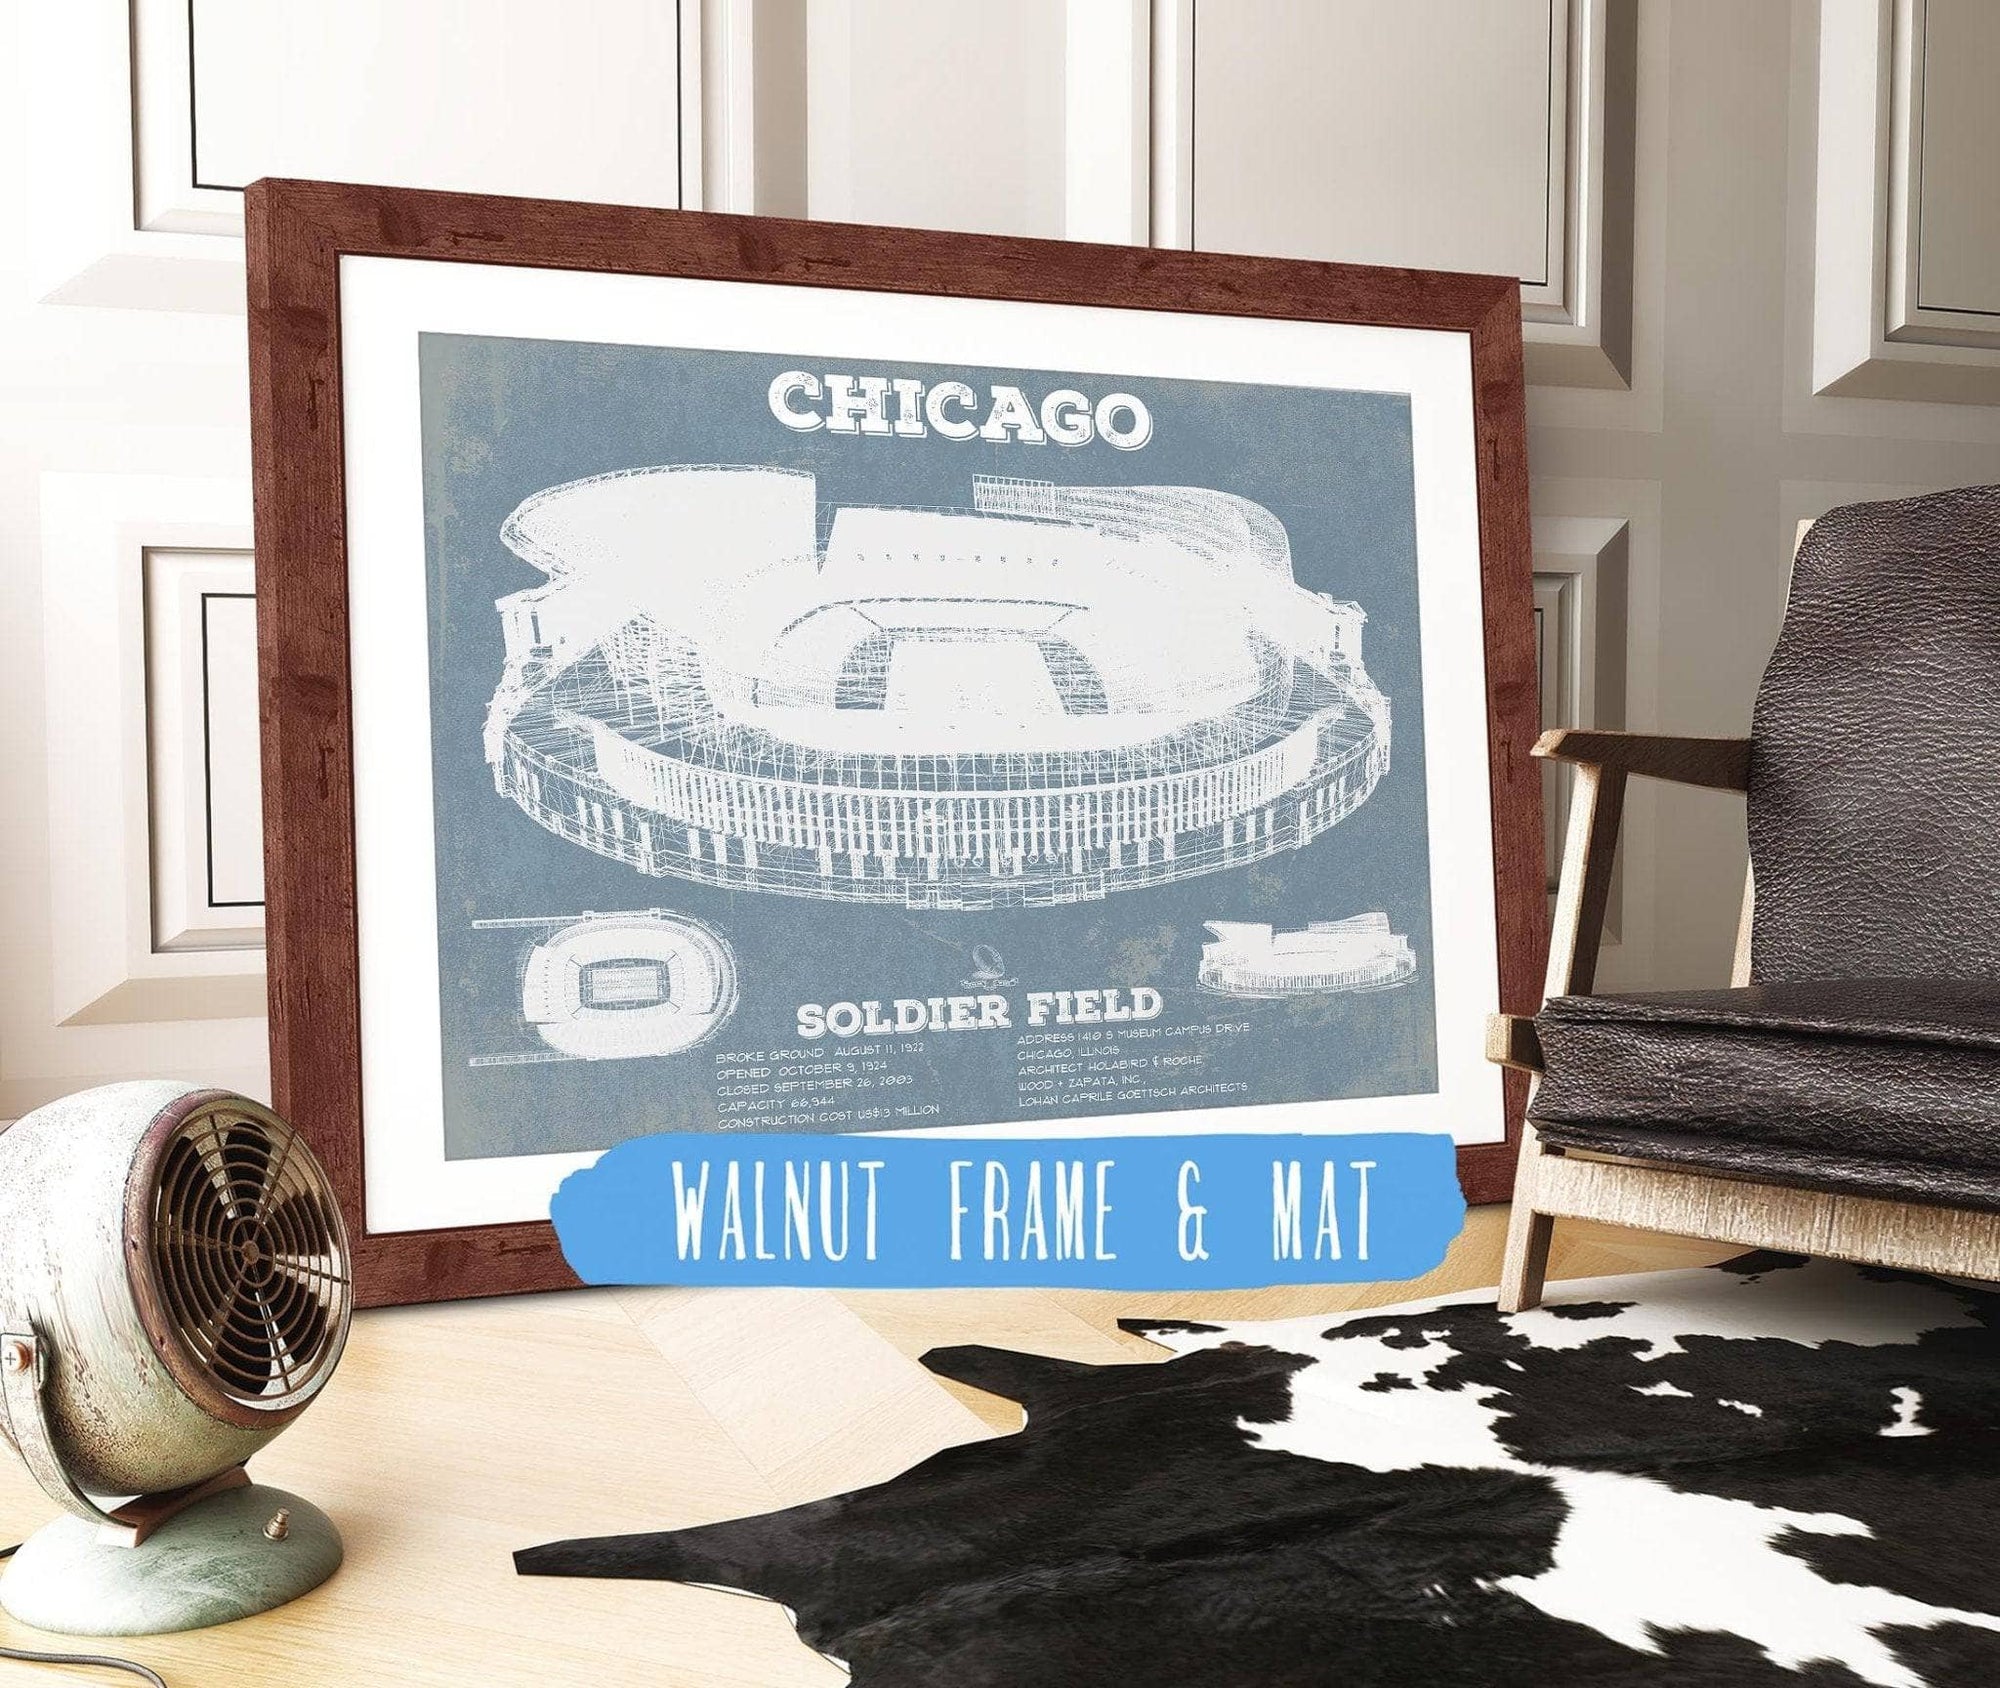 Cutler West Pro Football Collection 14" x 11" / Walnut Frame & Mat Chicago Bears Stadium Seating Chart Soldier Field Vintage Football Print 635629280_31450